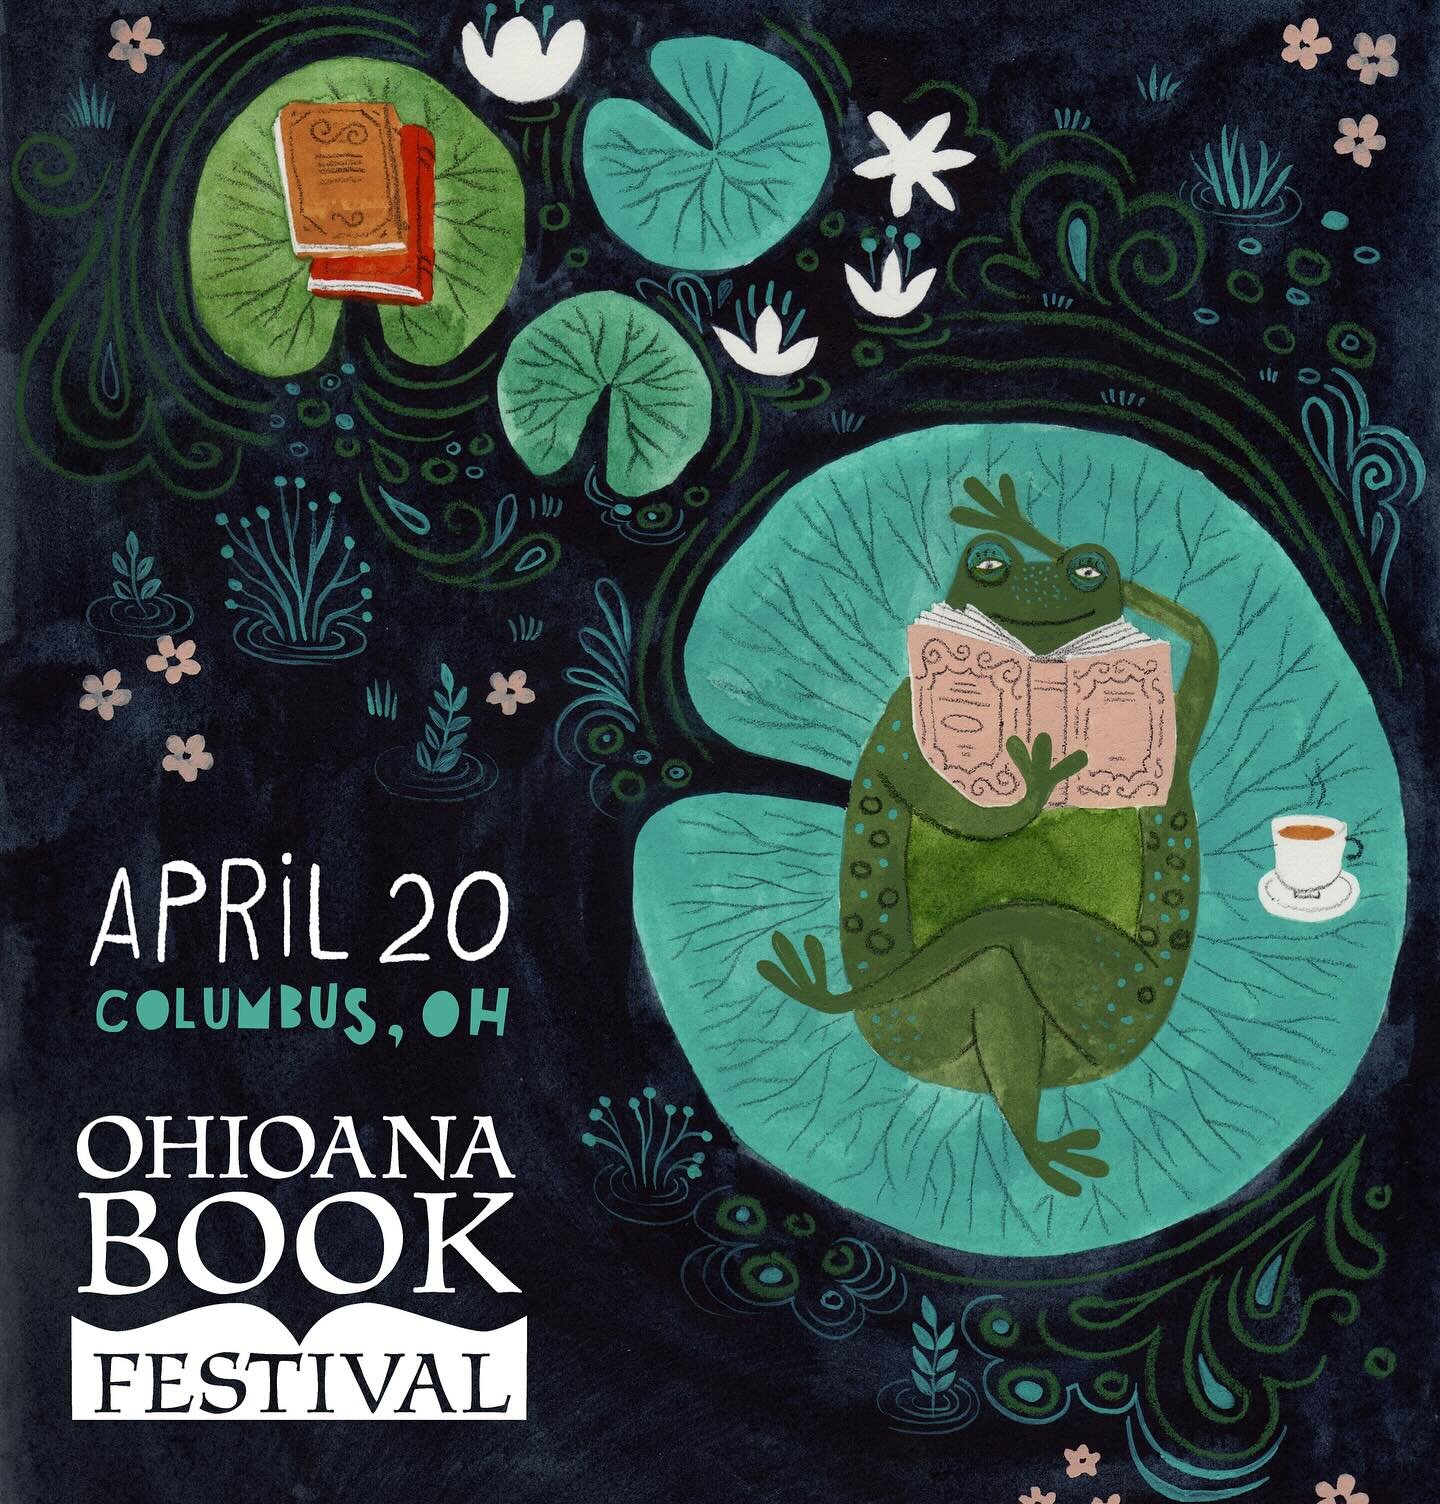 This April will be full of connections! It involves two big events for me - the first one is Ohioana Book Fest, here in Columbus, OH on April 20. And to avoid confusion, I&rsquo;m going to tell about the second event later.
I was invited to join the 